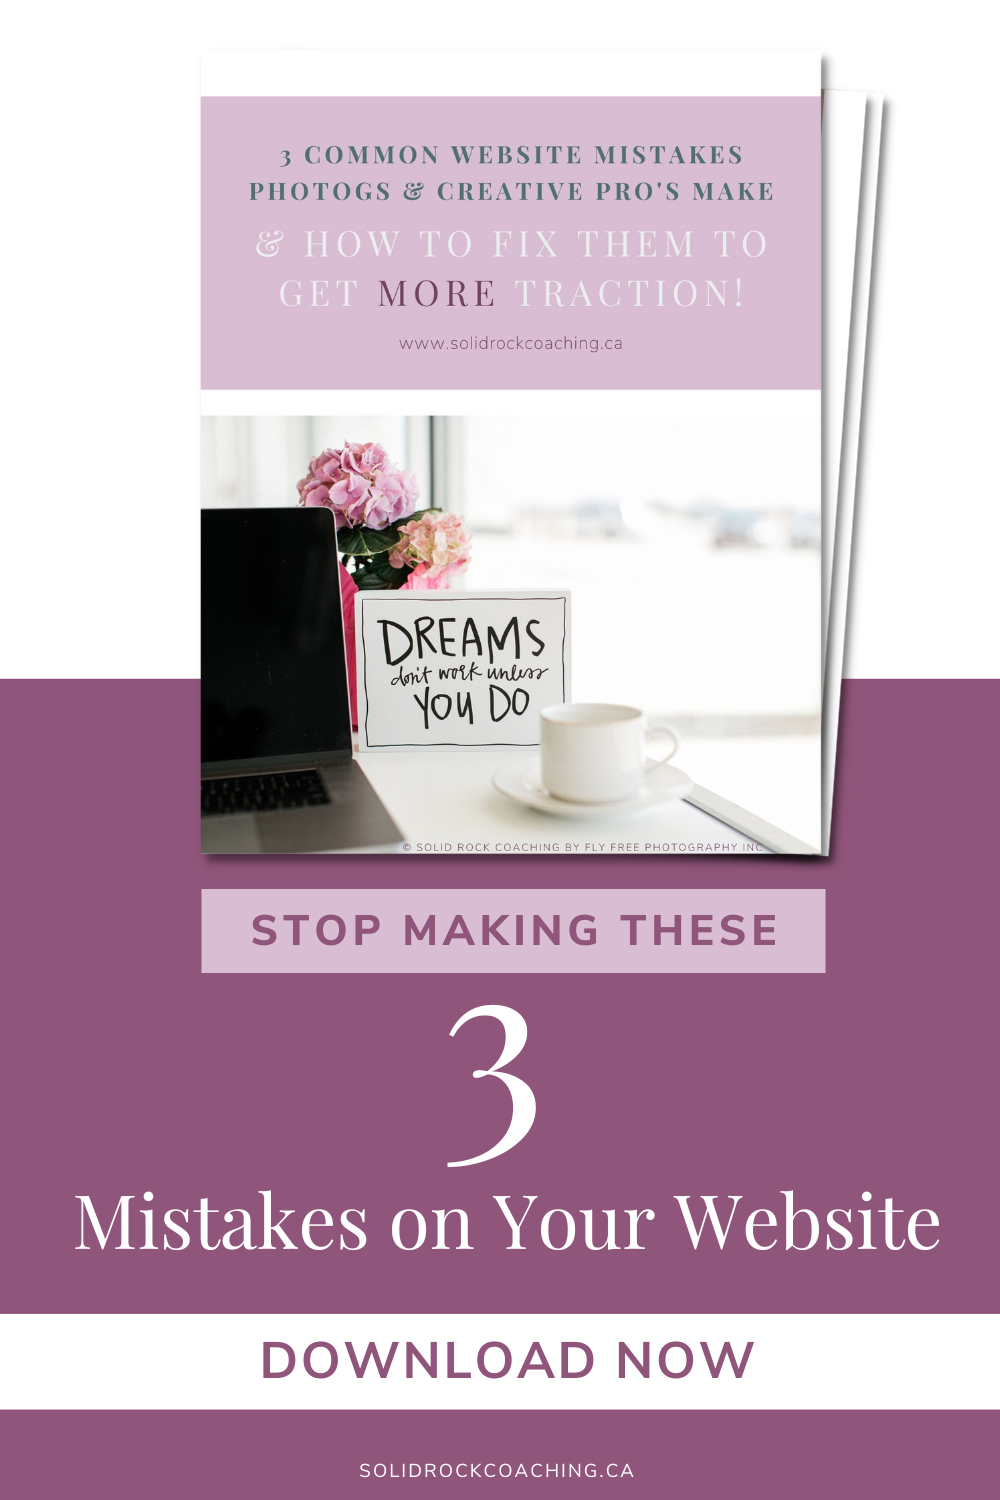 Stop Making These 3 Mistakes on Your Website